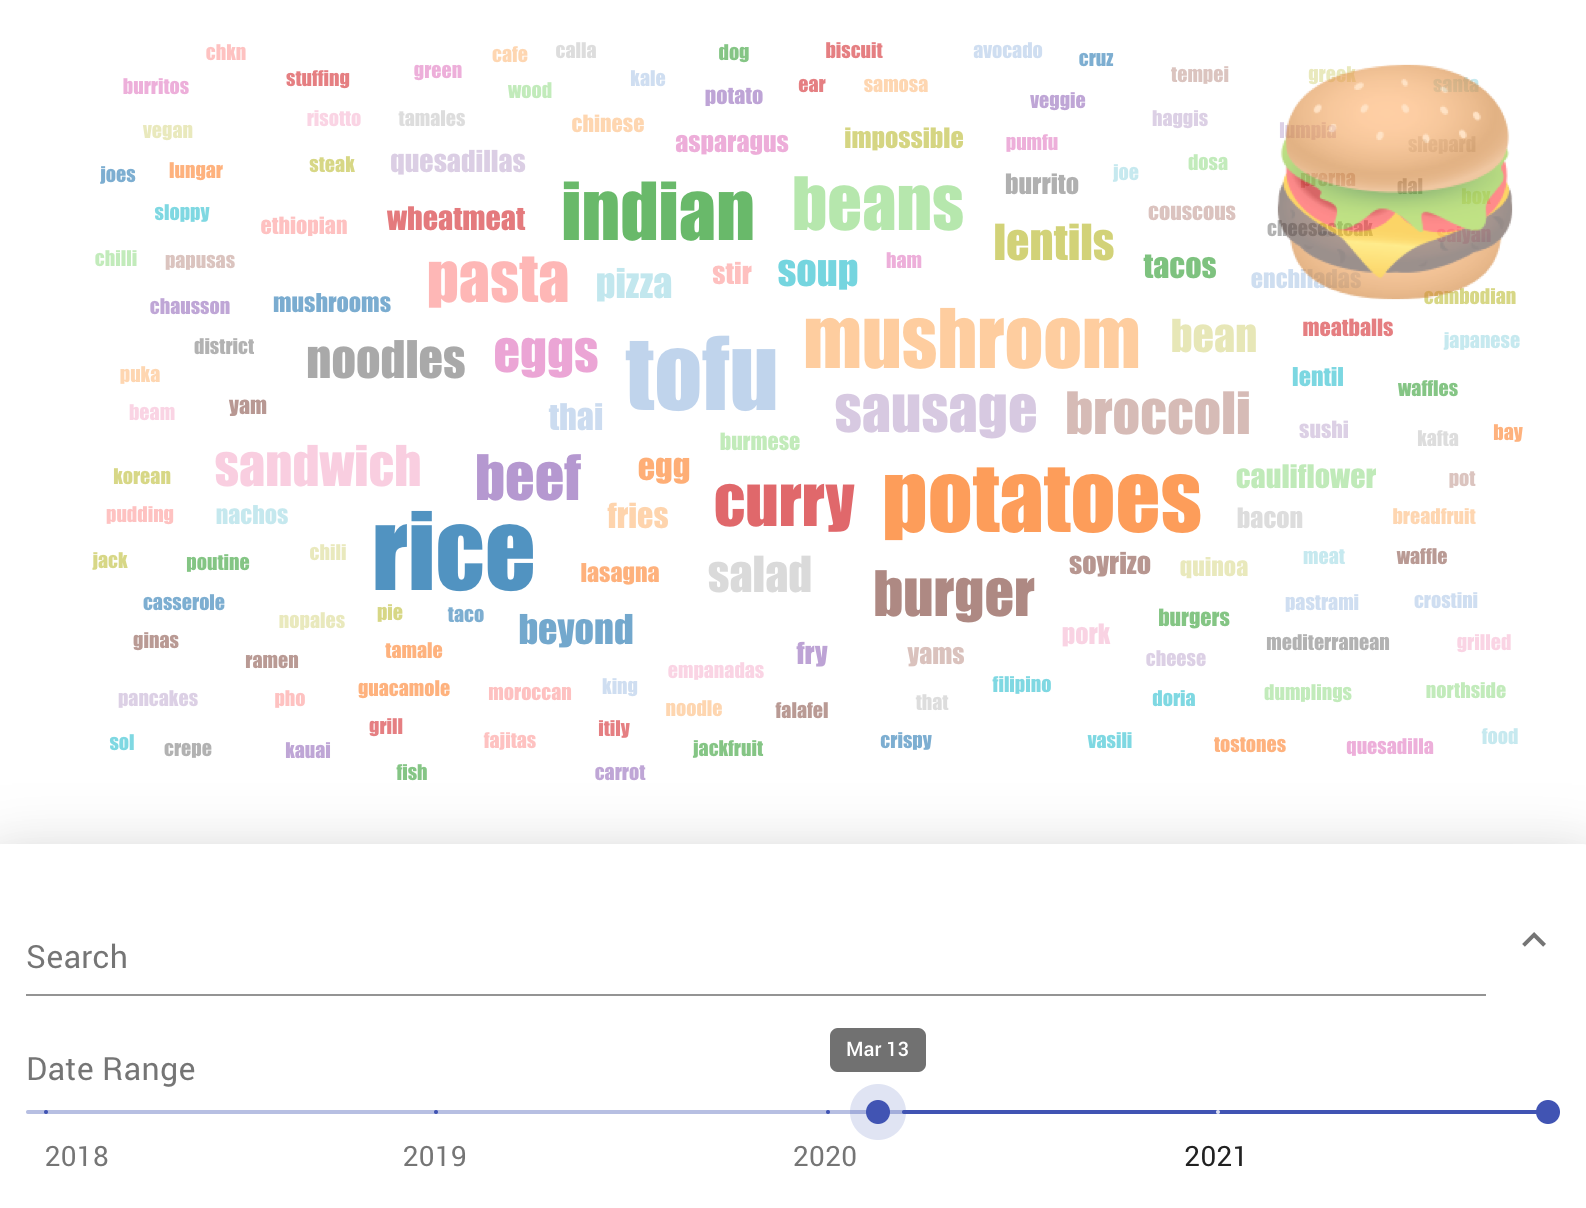 Wordcloud of ingredients and types of food from March 2020 to July 2020. The biggest are 'beef' and 'salad'